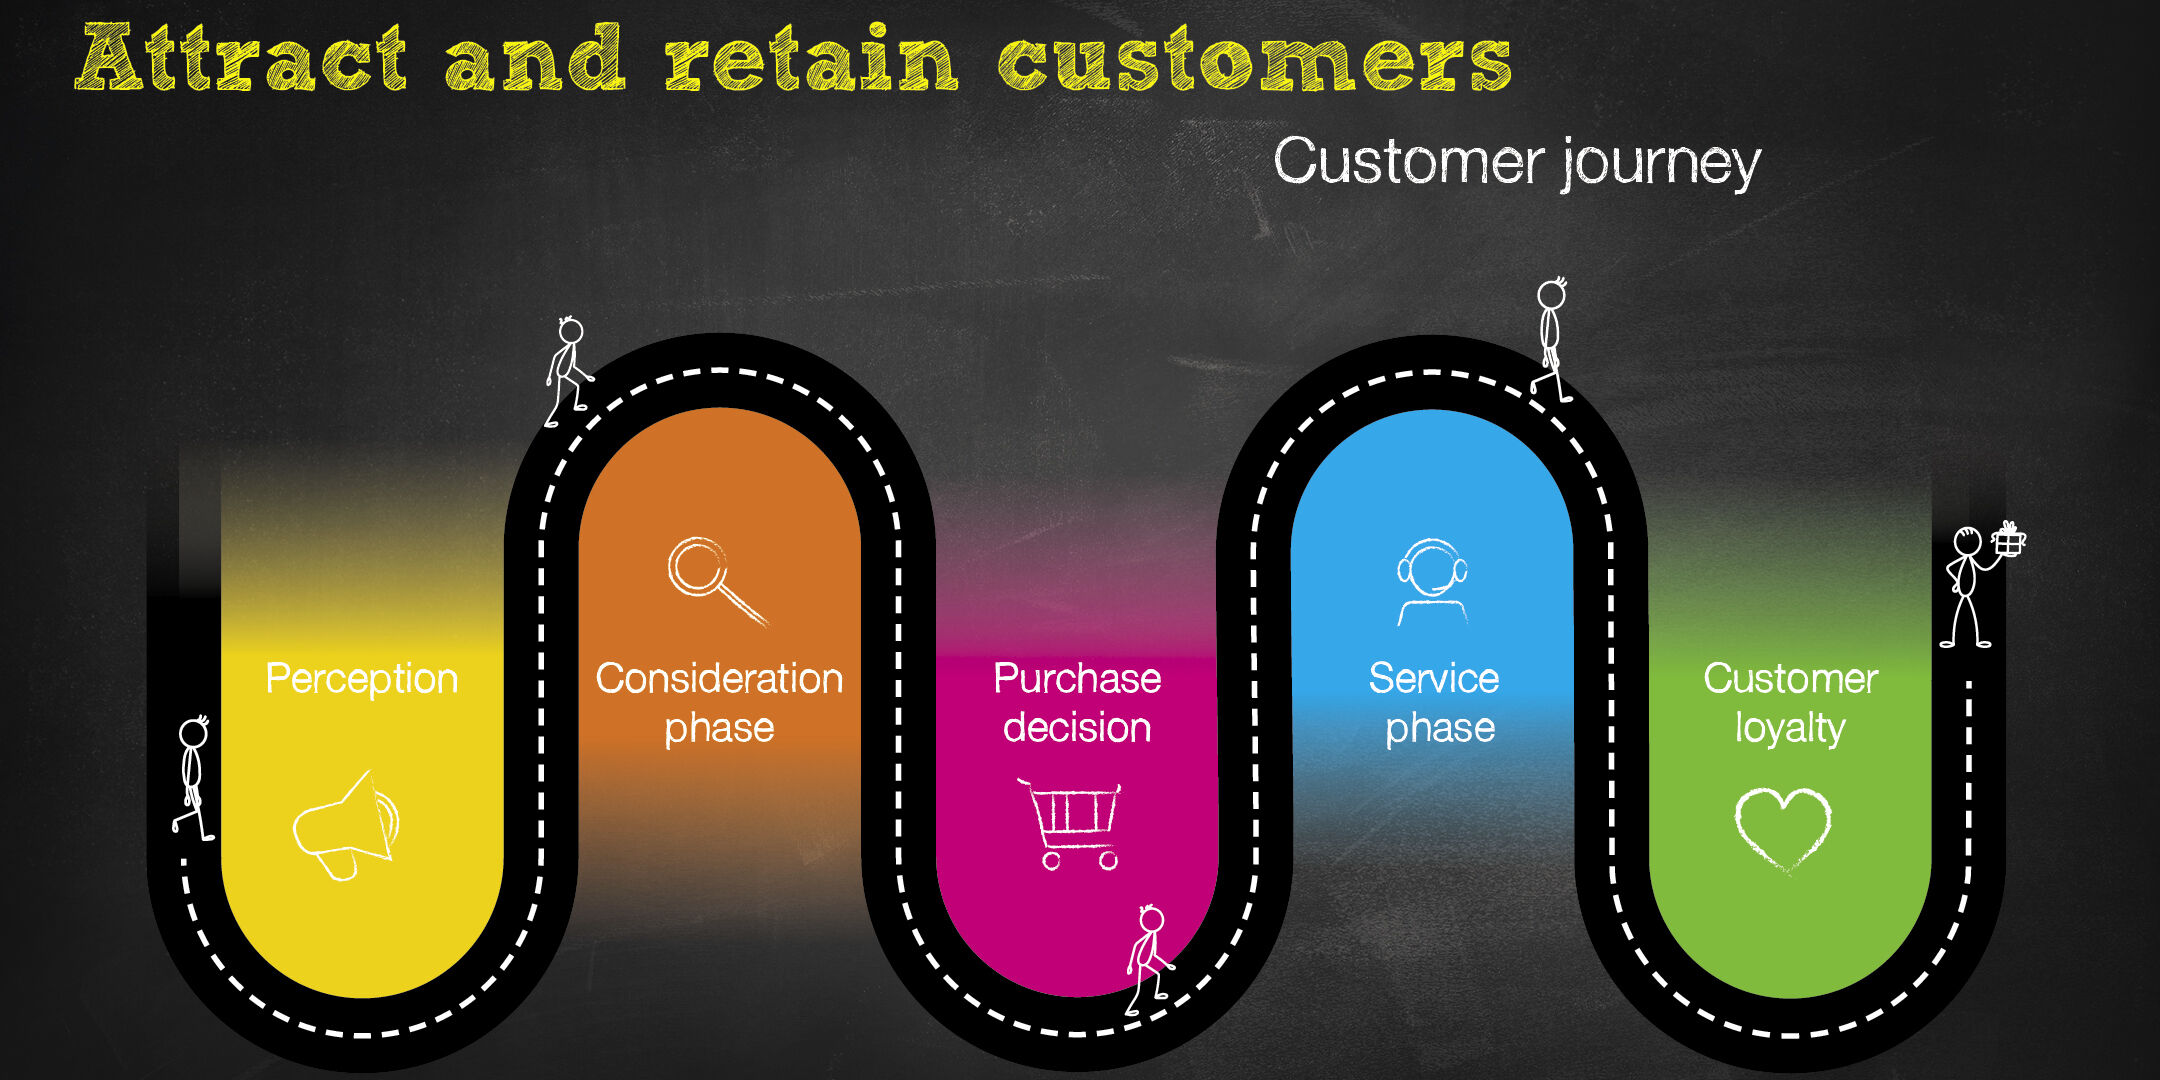 Customer journey – or why many customers don't even make the journey to you or cancel it